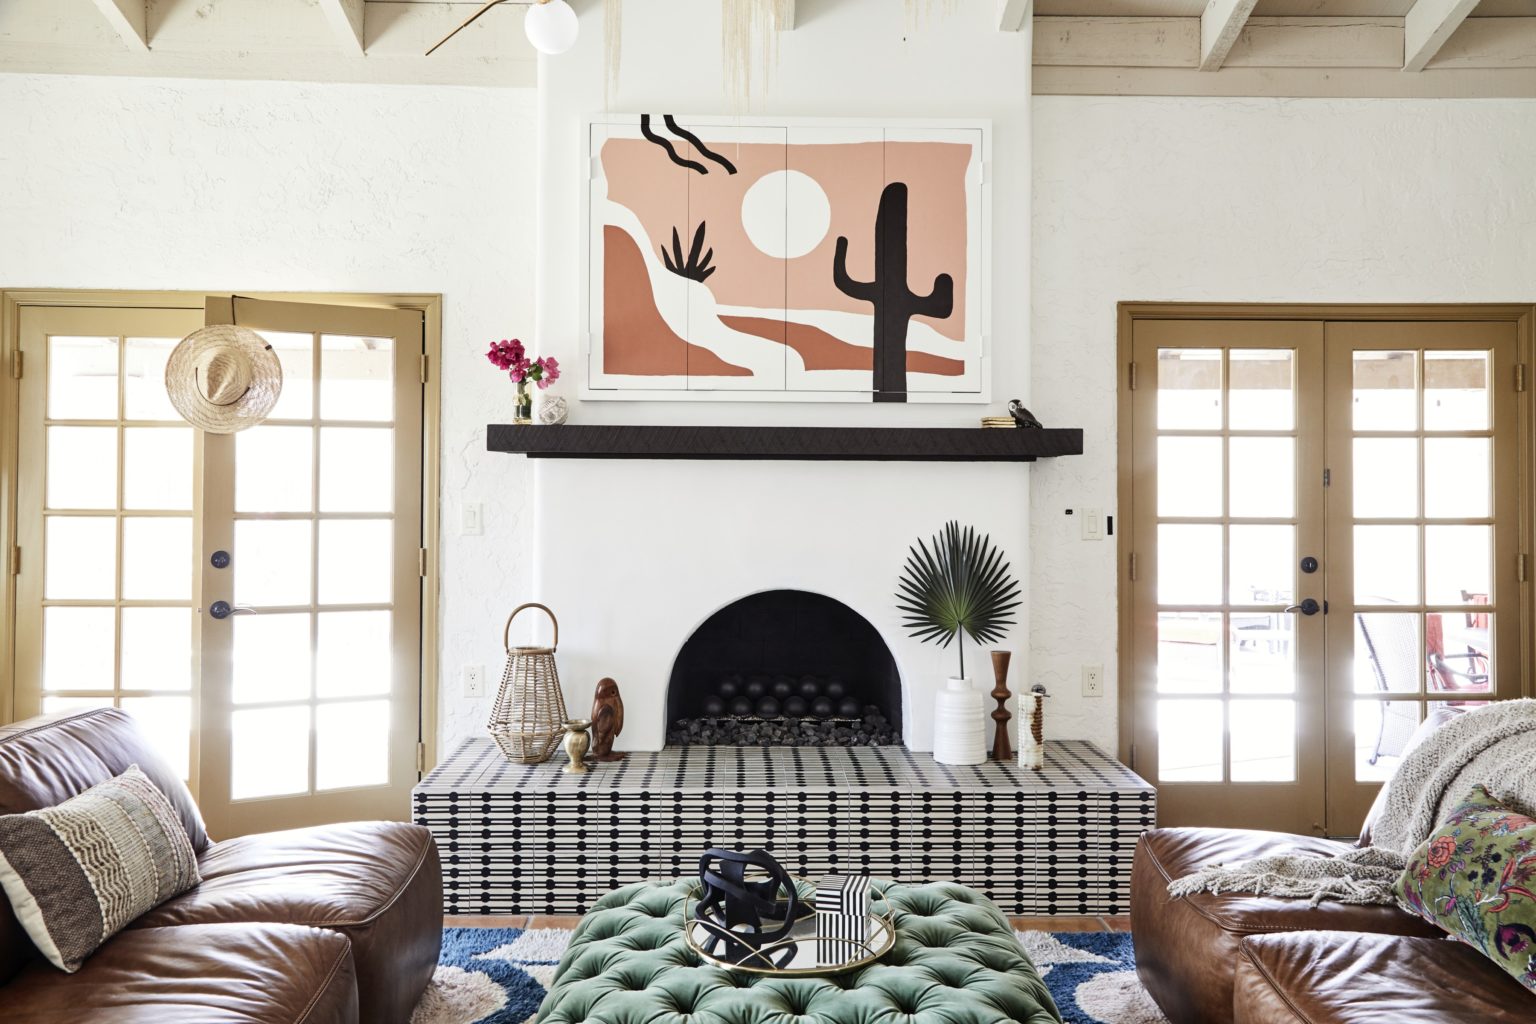 a modern fireplace tiled with clé tile cement squares from artist erica tanov in jacobsen.